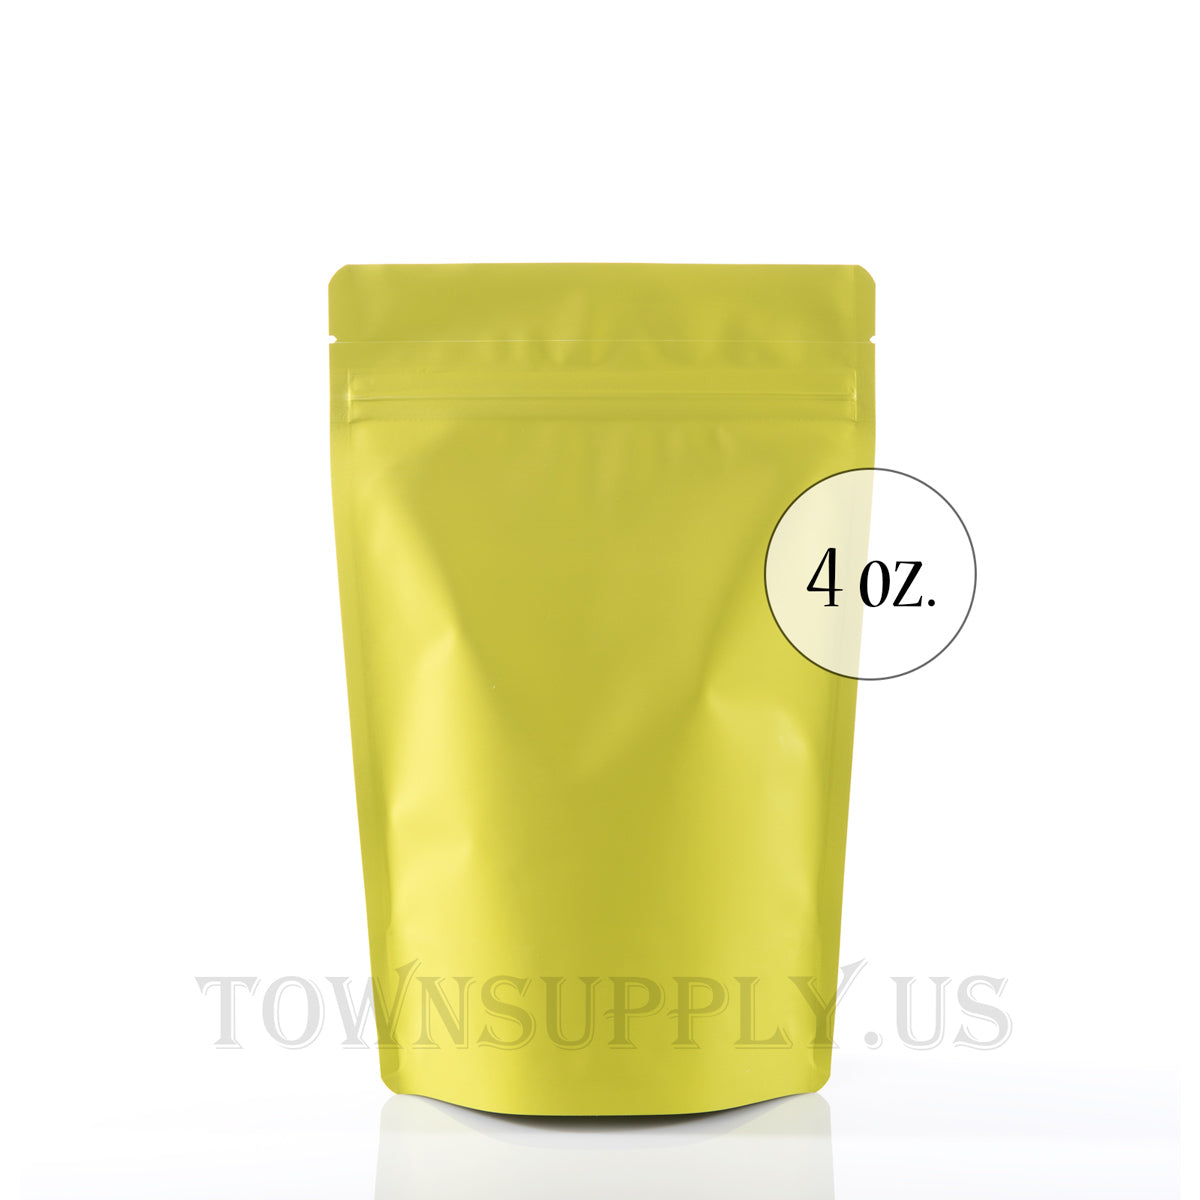 chartreuse resealable stand up pouch, 4 oz. storage bags - Town Supply